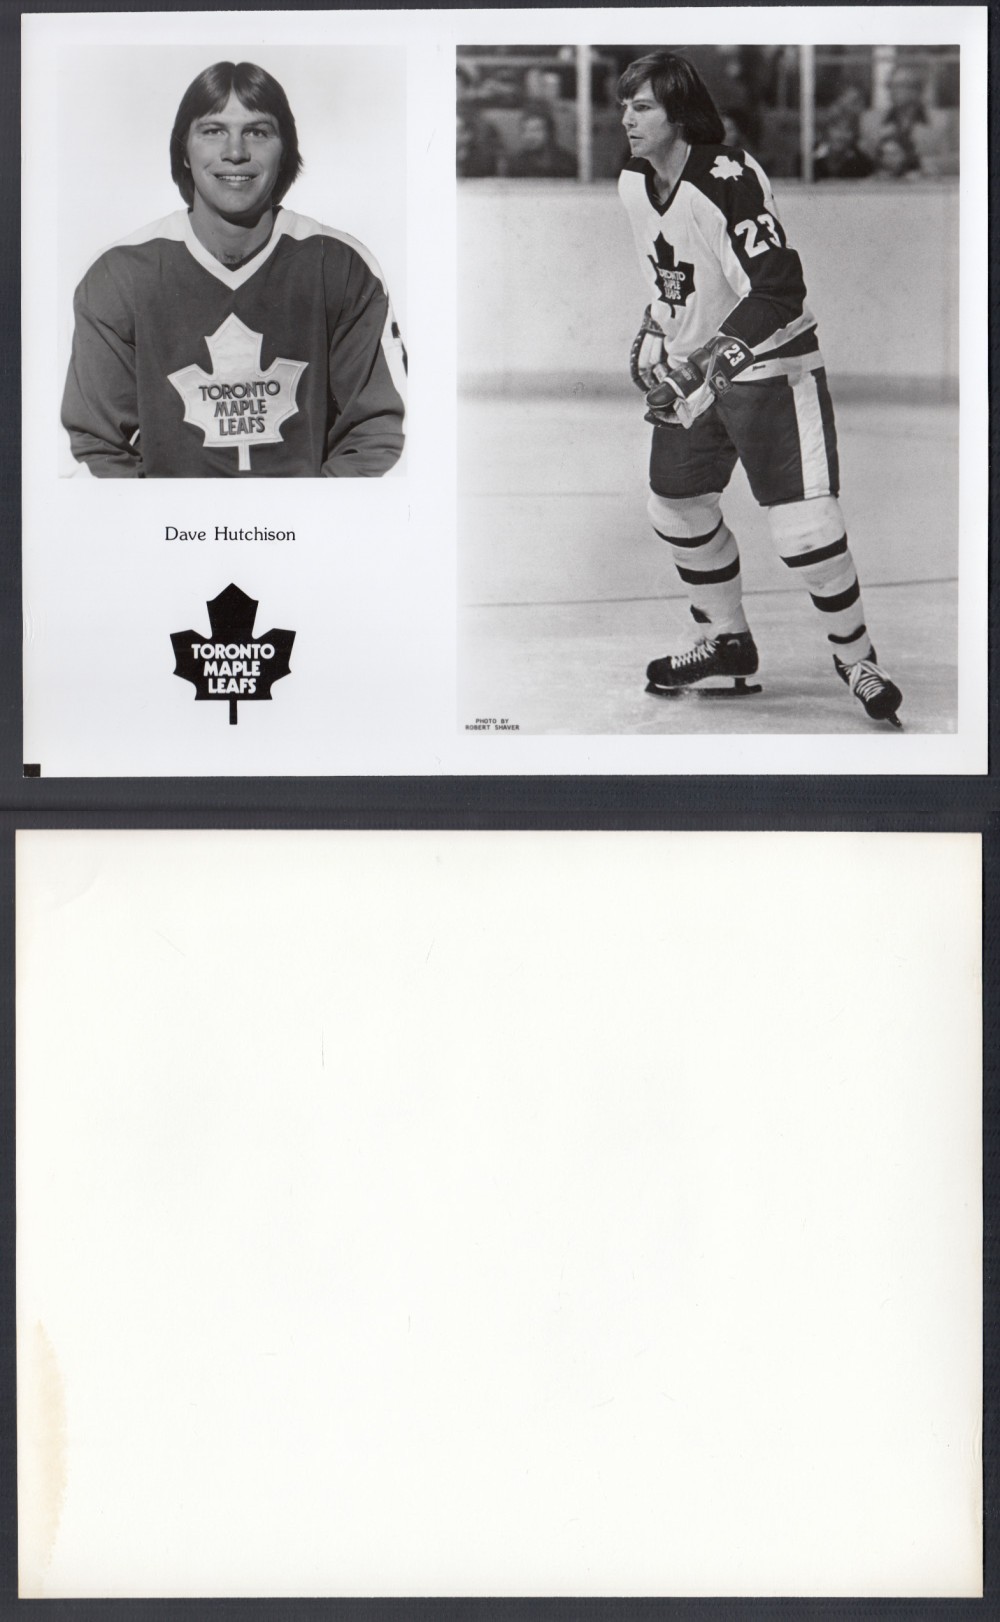 EARLY 1980'S TORONTO MAPLE LEAFS MEDIA PHOTO D. HUTCHISON photo